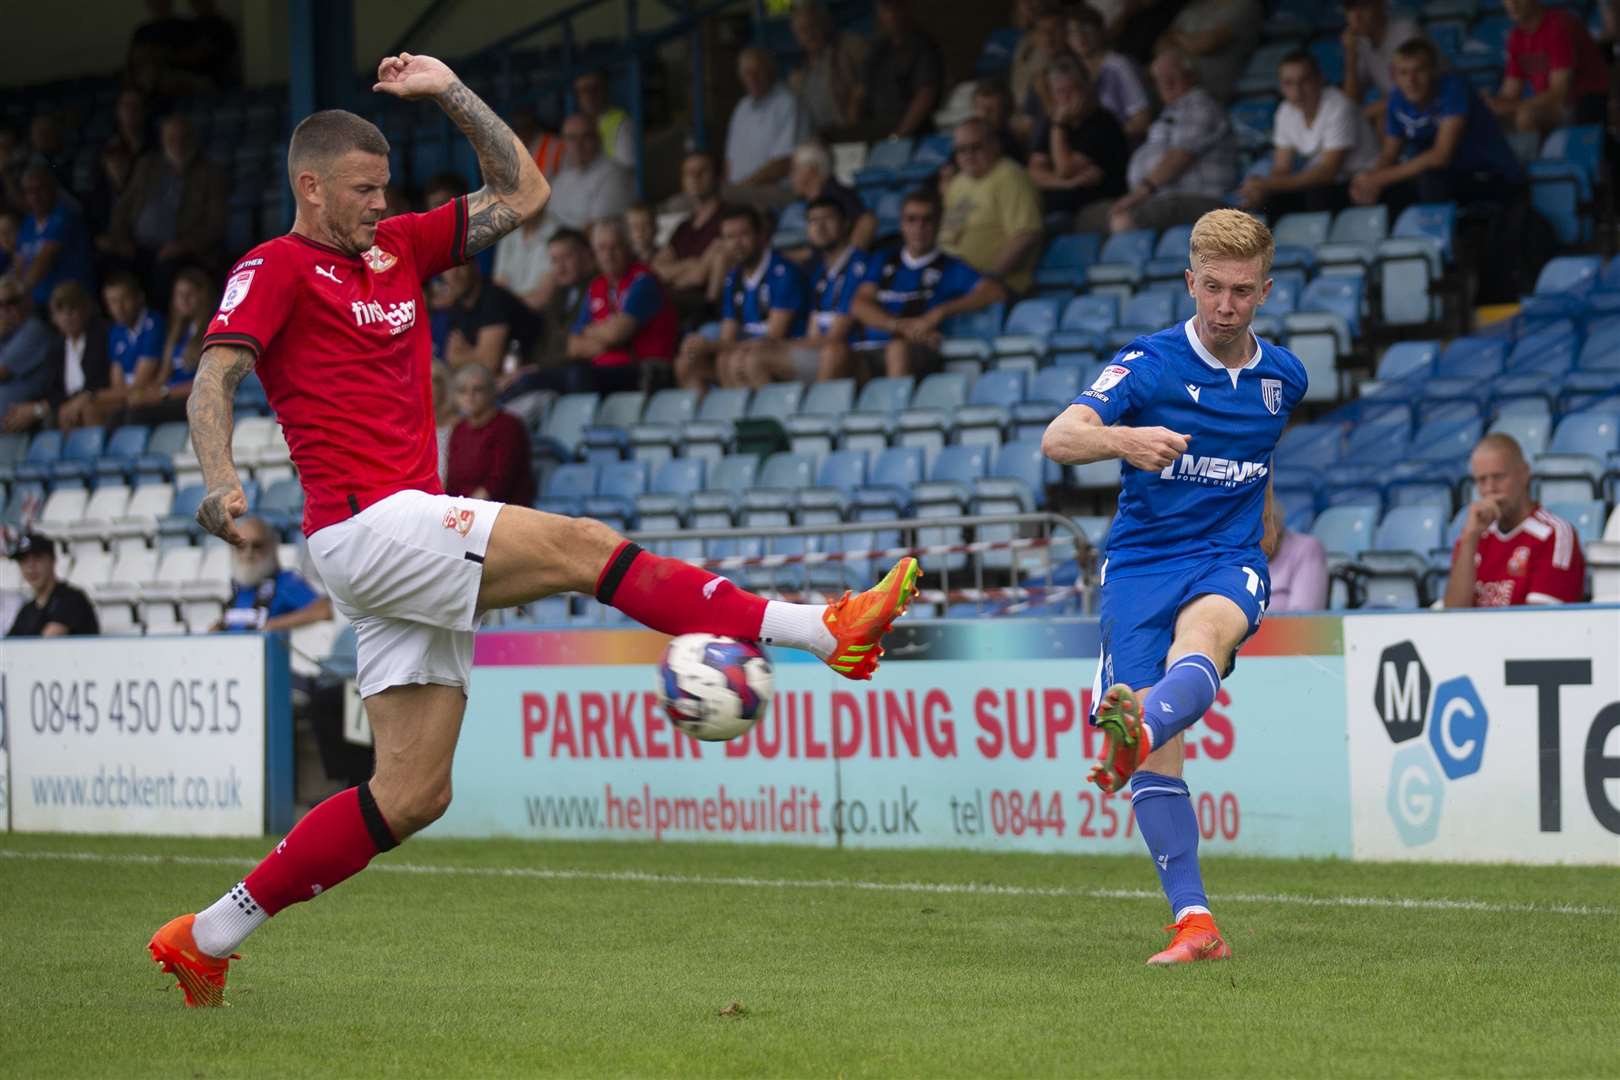 Gillingham are back in action for the first time since a goalless draw with Swindon Town Picture: KPI